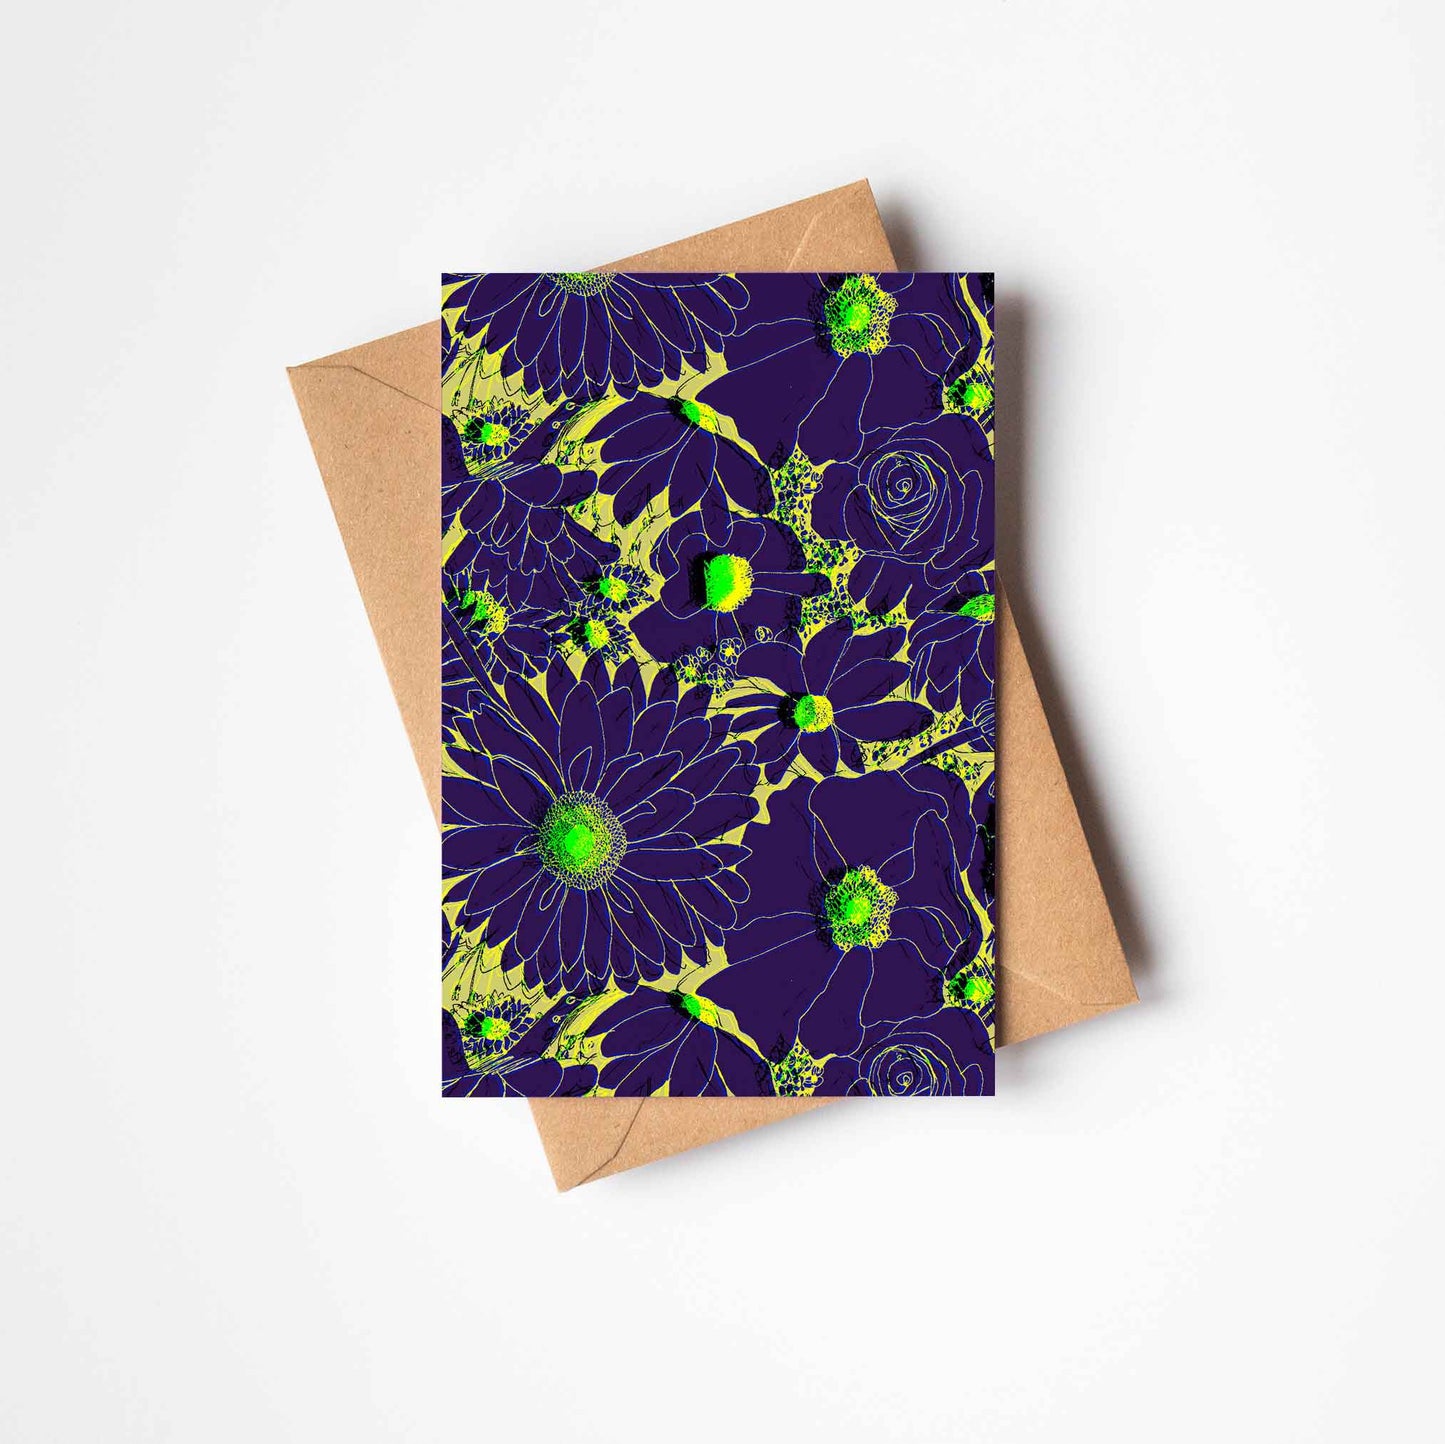 Late Bloom Floral Art Greeting Card